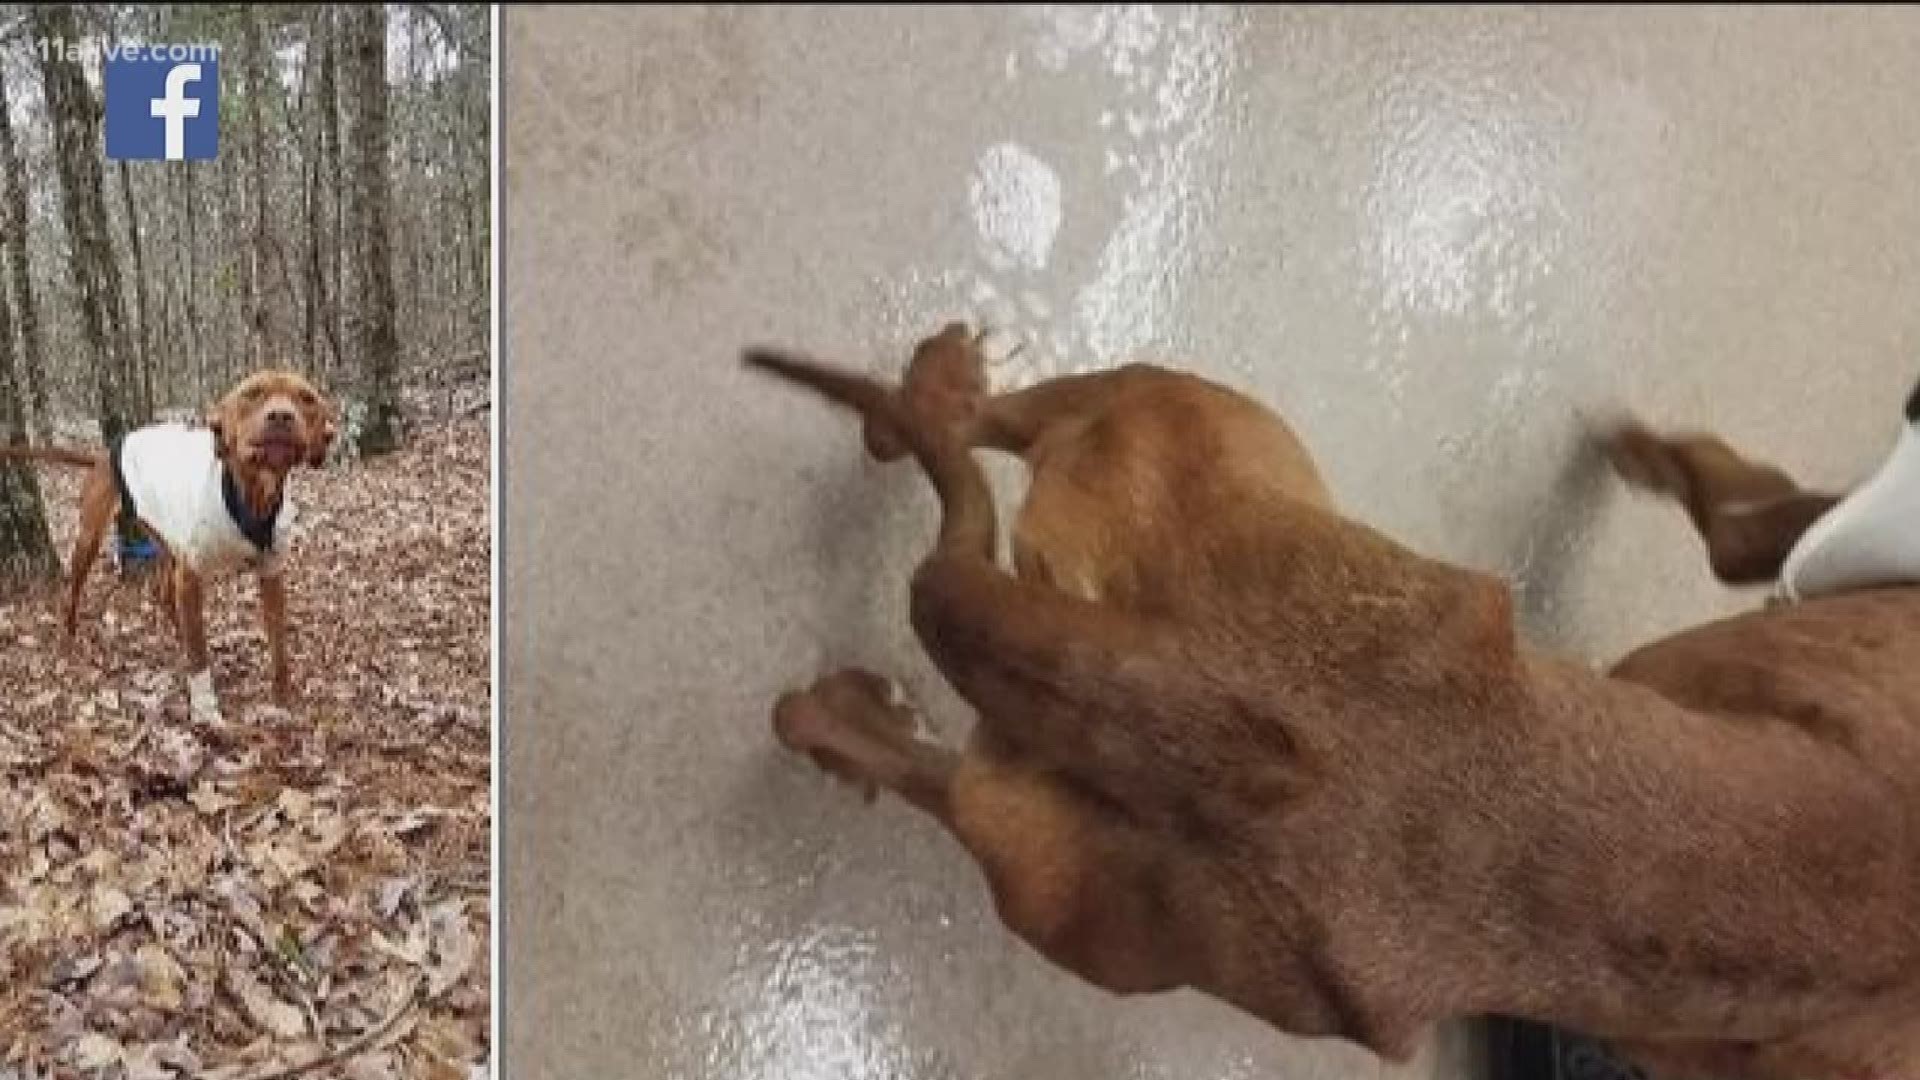 The emaciated dog was found abandoned and tied to a tree near the Arabian Mountain Nature Center in Lithonia on March 10. Police are currently trying to find the owner.